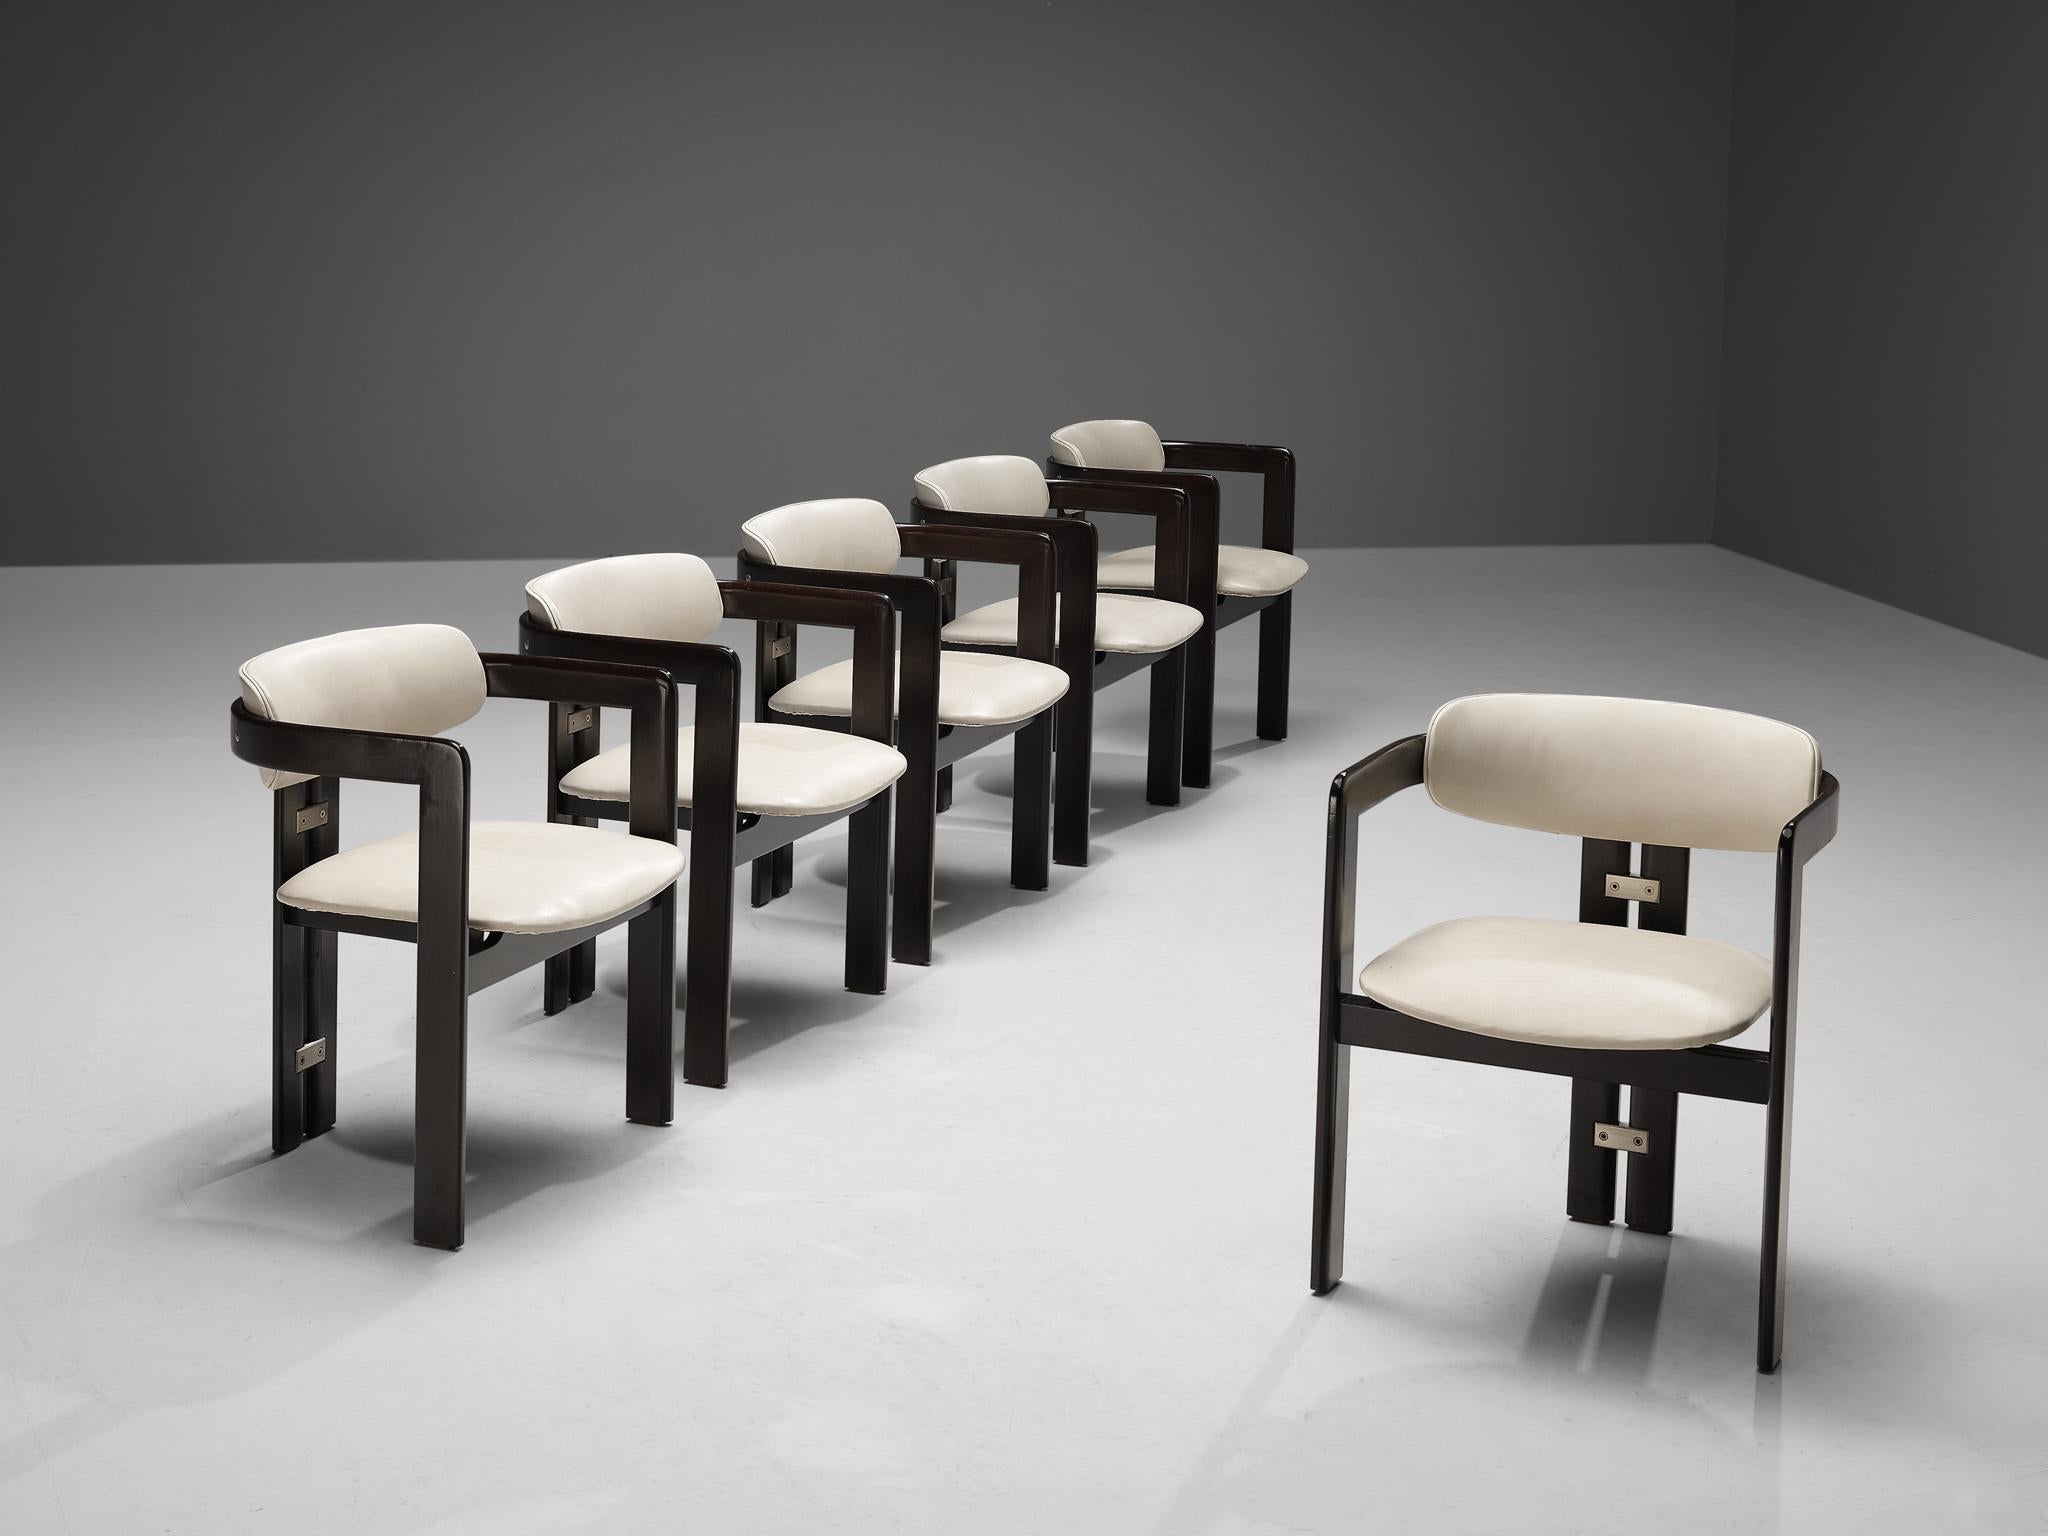 Augusto Savini for Pozzi, set of six 'Pamplona' dining chairs, lacquered wood, white leather upholstery, aluminum, Italy, 1965

Set of six armchairs in black lacquered wood and white leather upholstery. A characteristic design; simplistic yet very